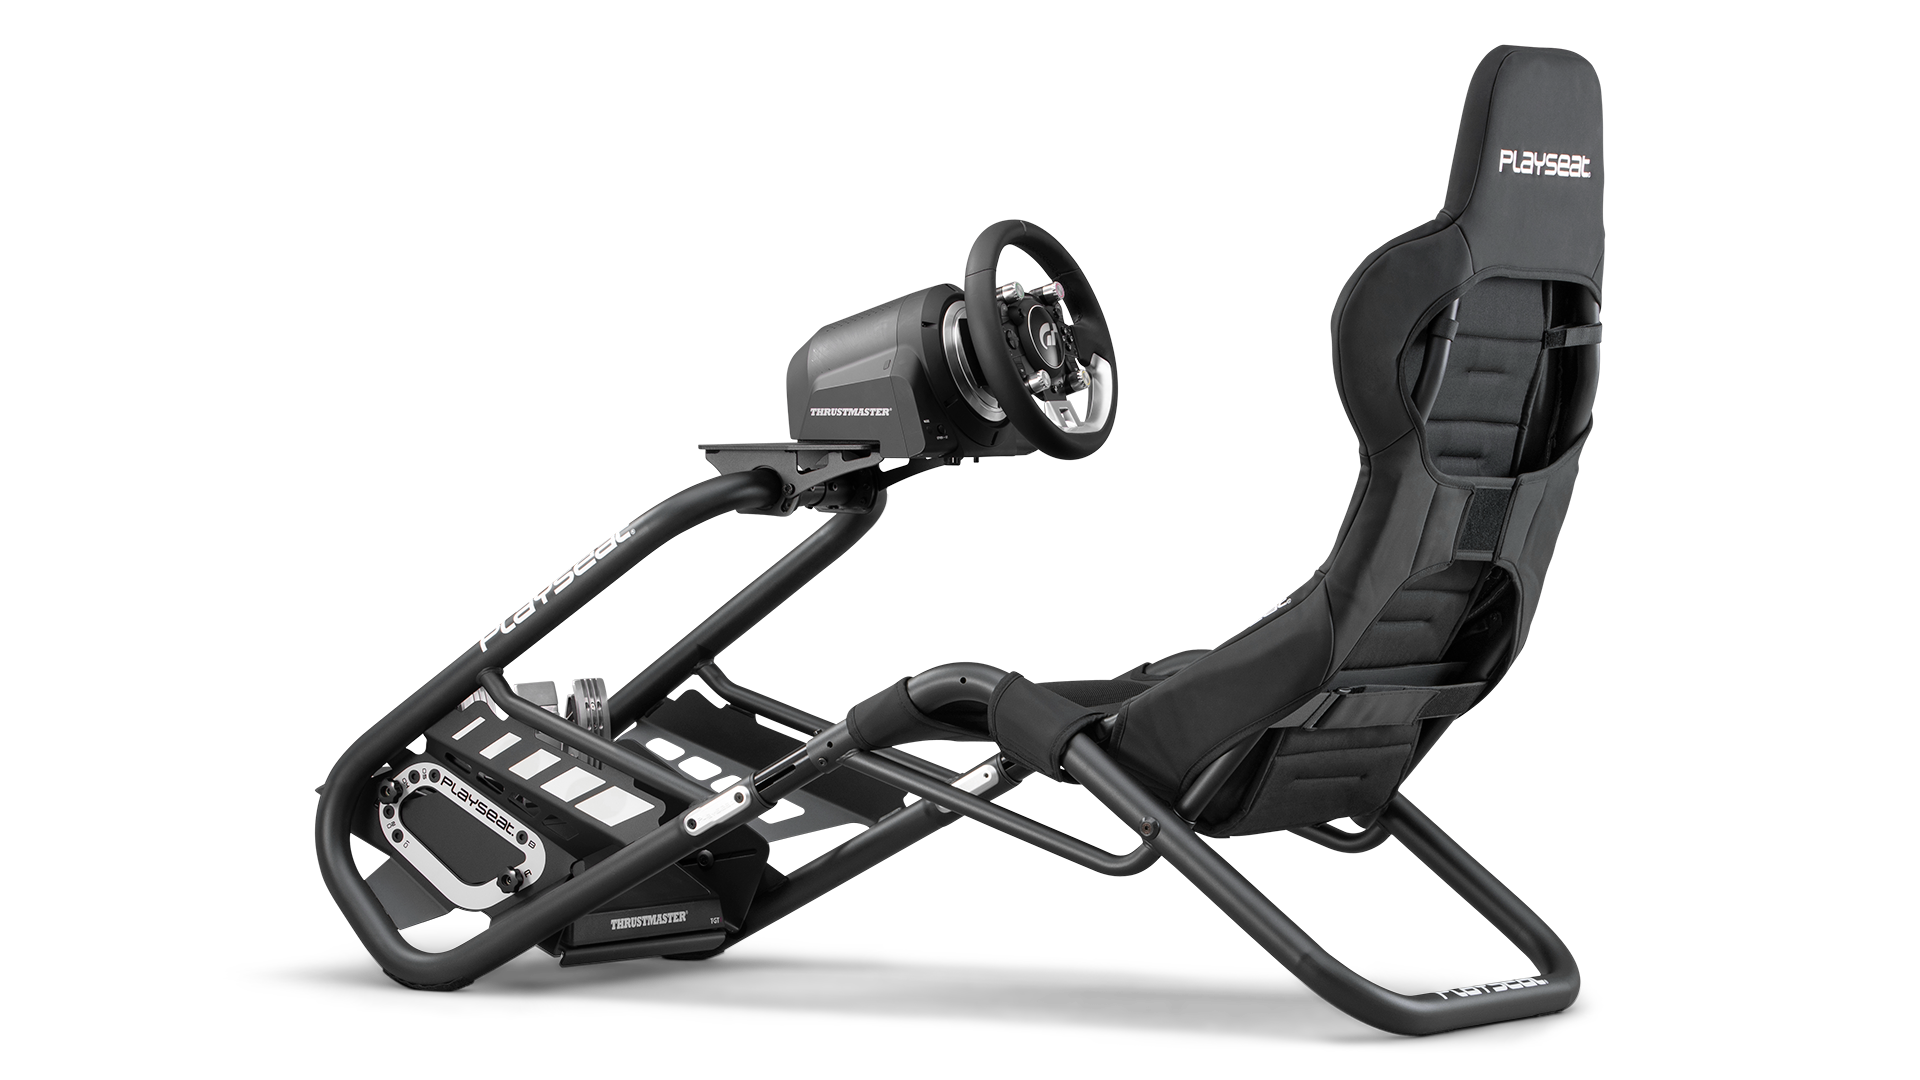 playseat-trophy-black-direct-drive-simulator-back-angle-view-thrustmaster-1920x1080-7.png